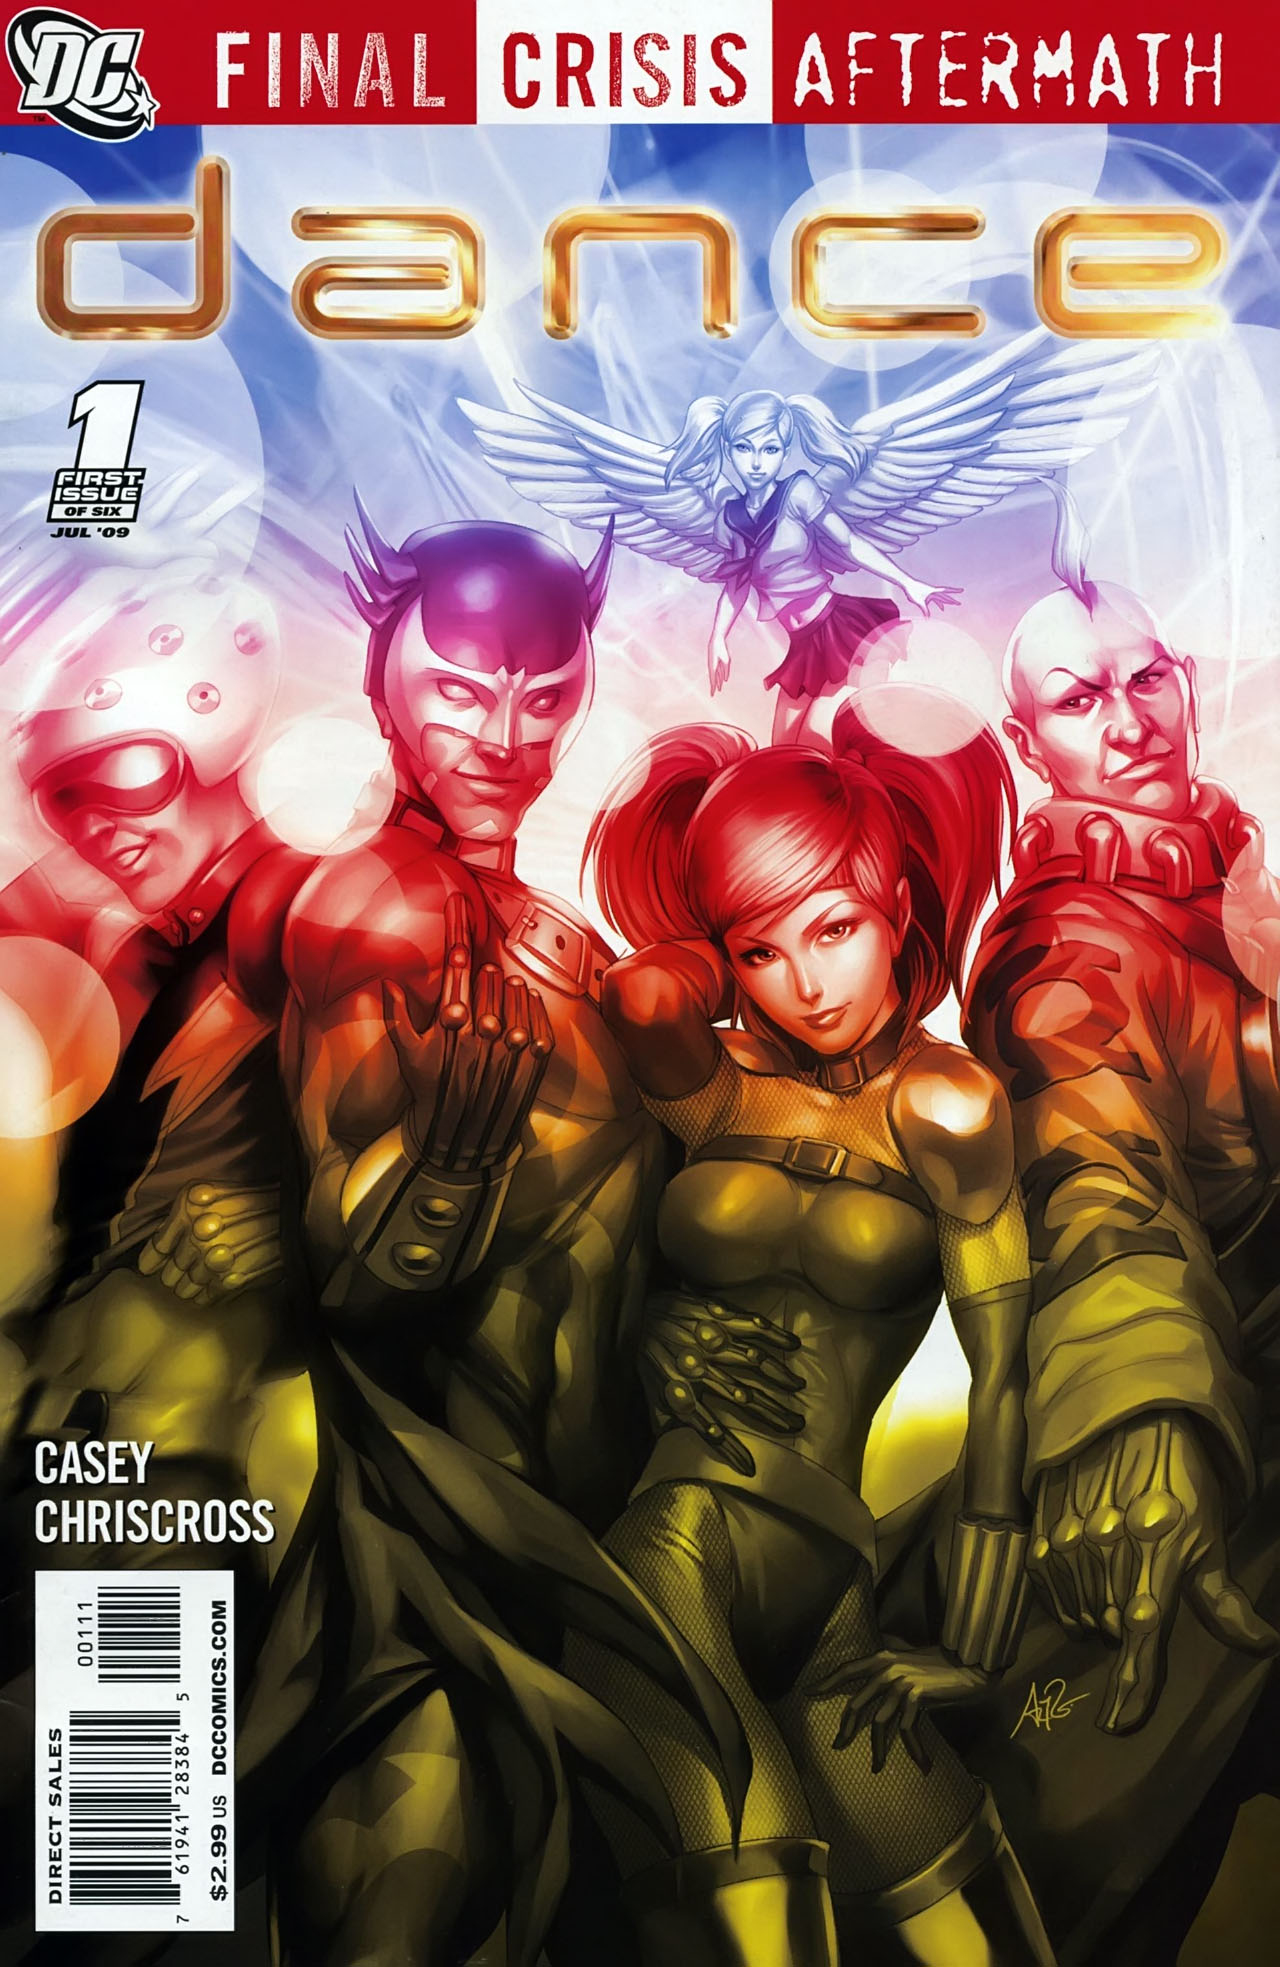 Final Crisis Aftermath: Dance Issue #1 #1 - English 1